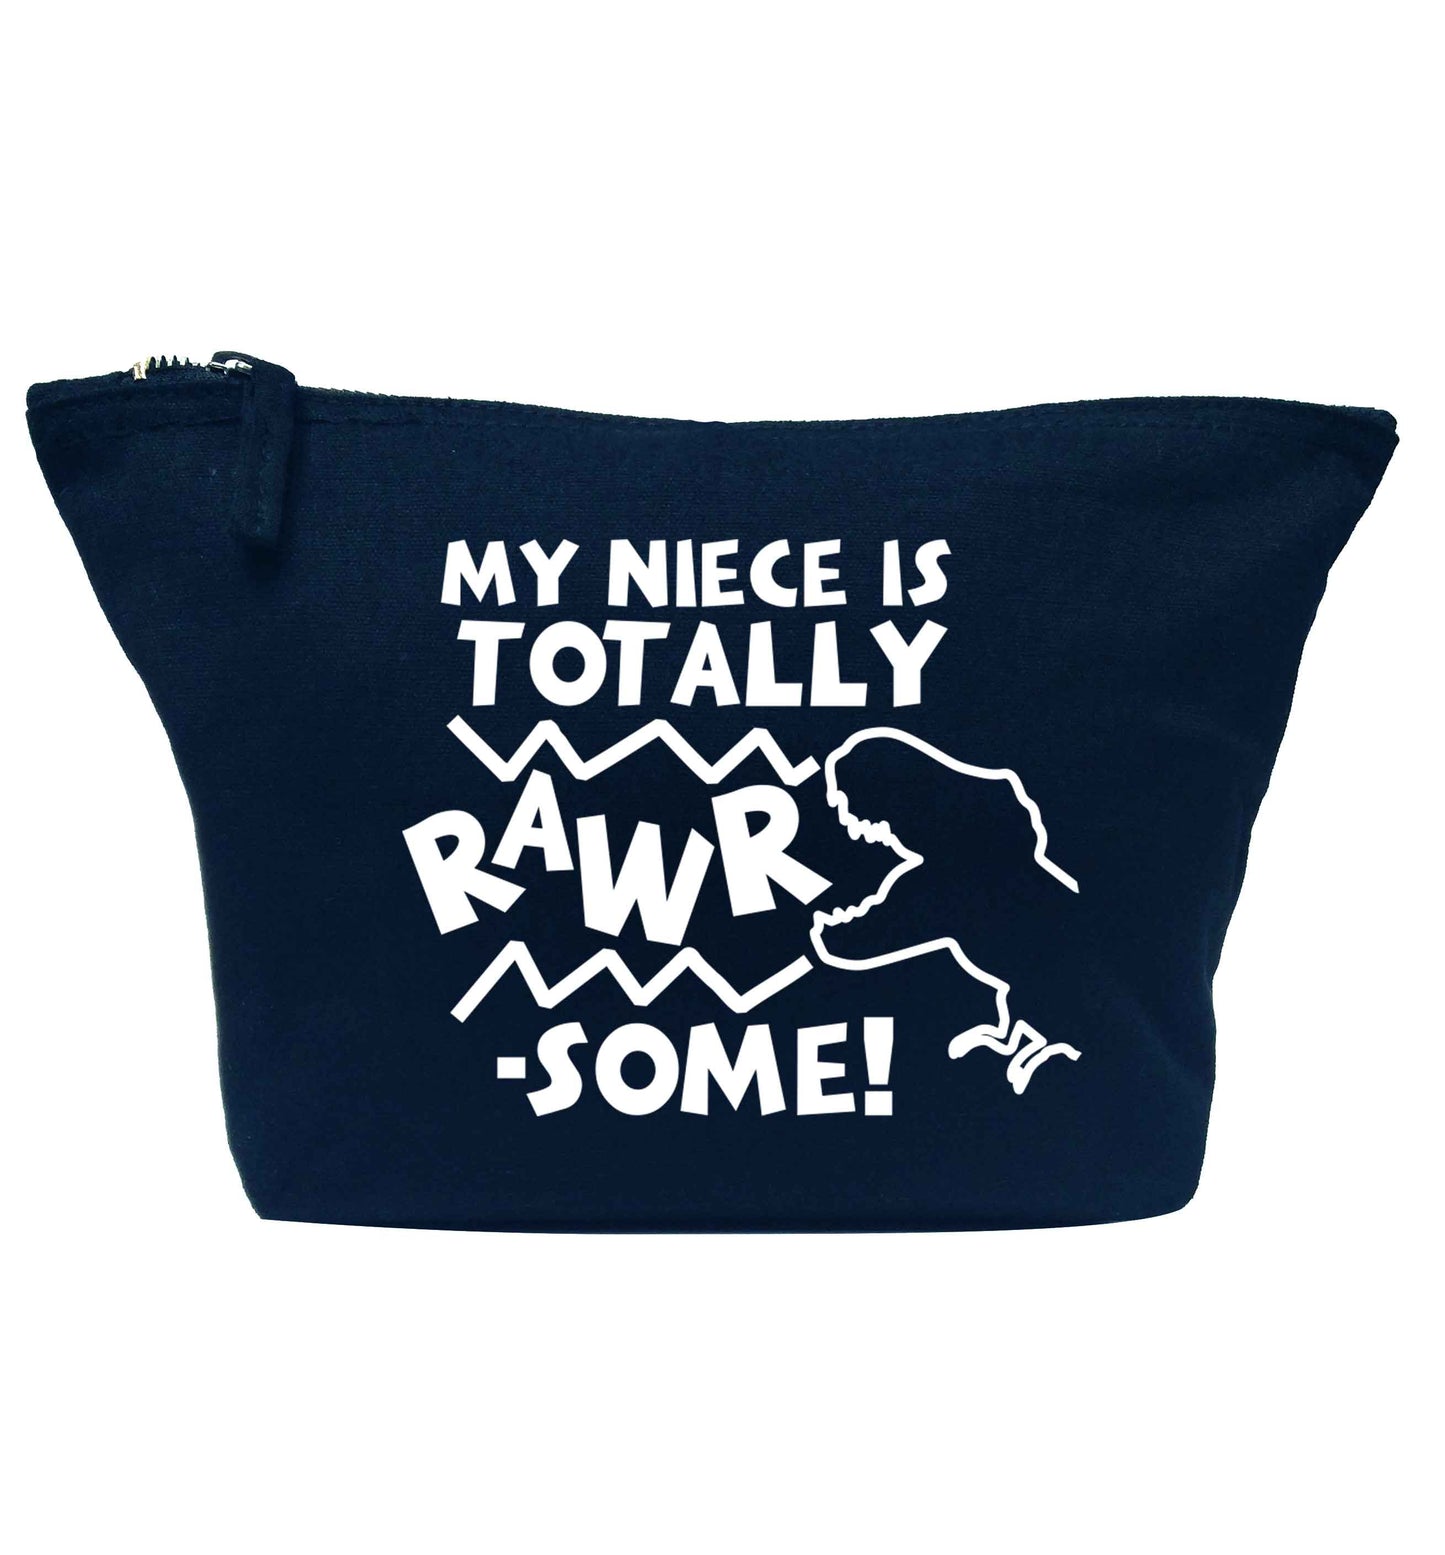 My niece is totally rawrsome navy makeup bag